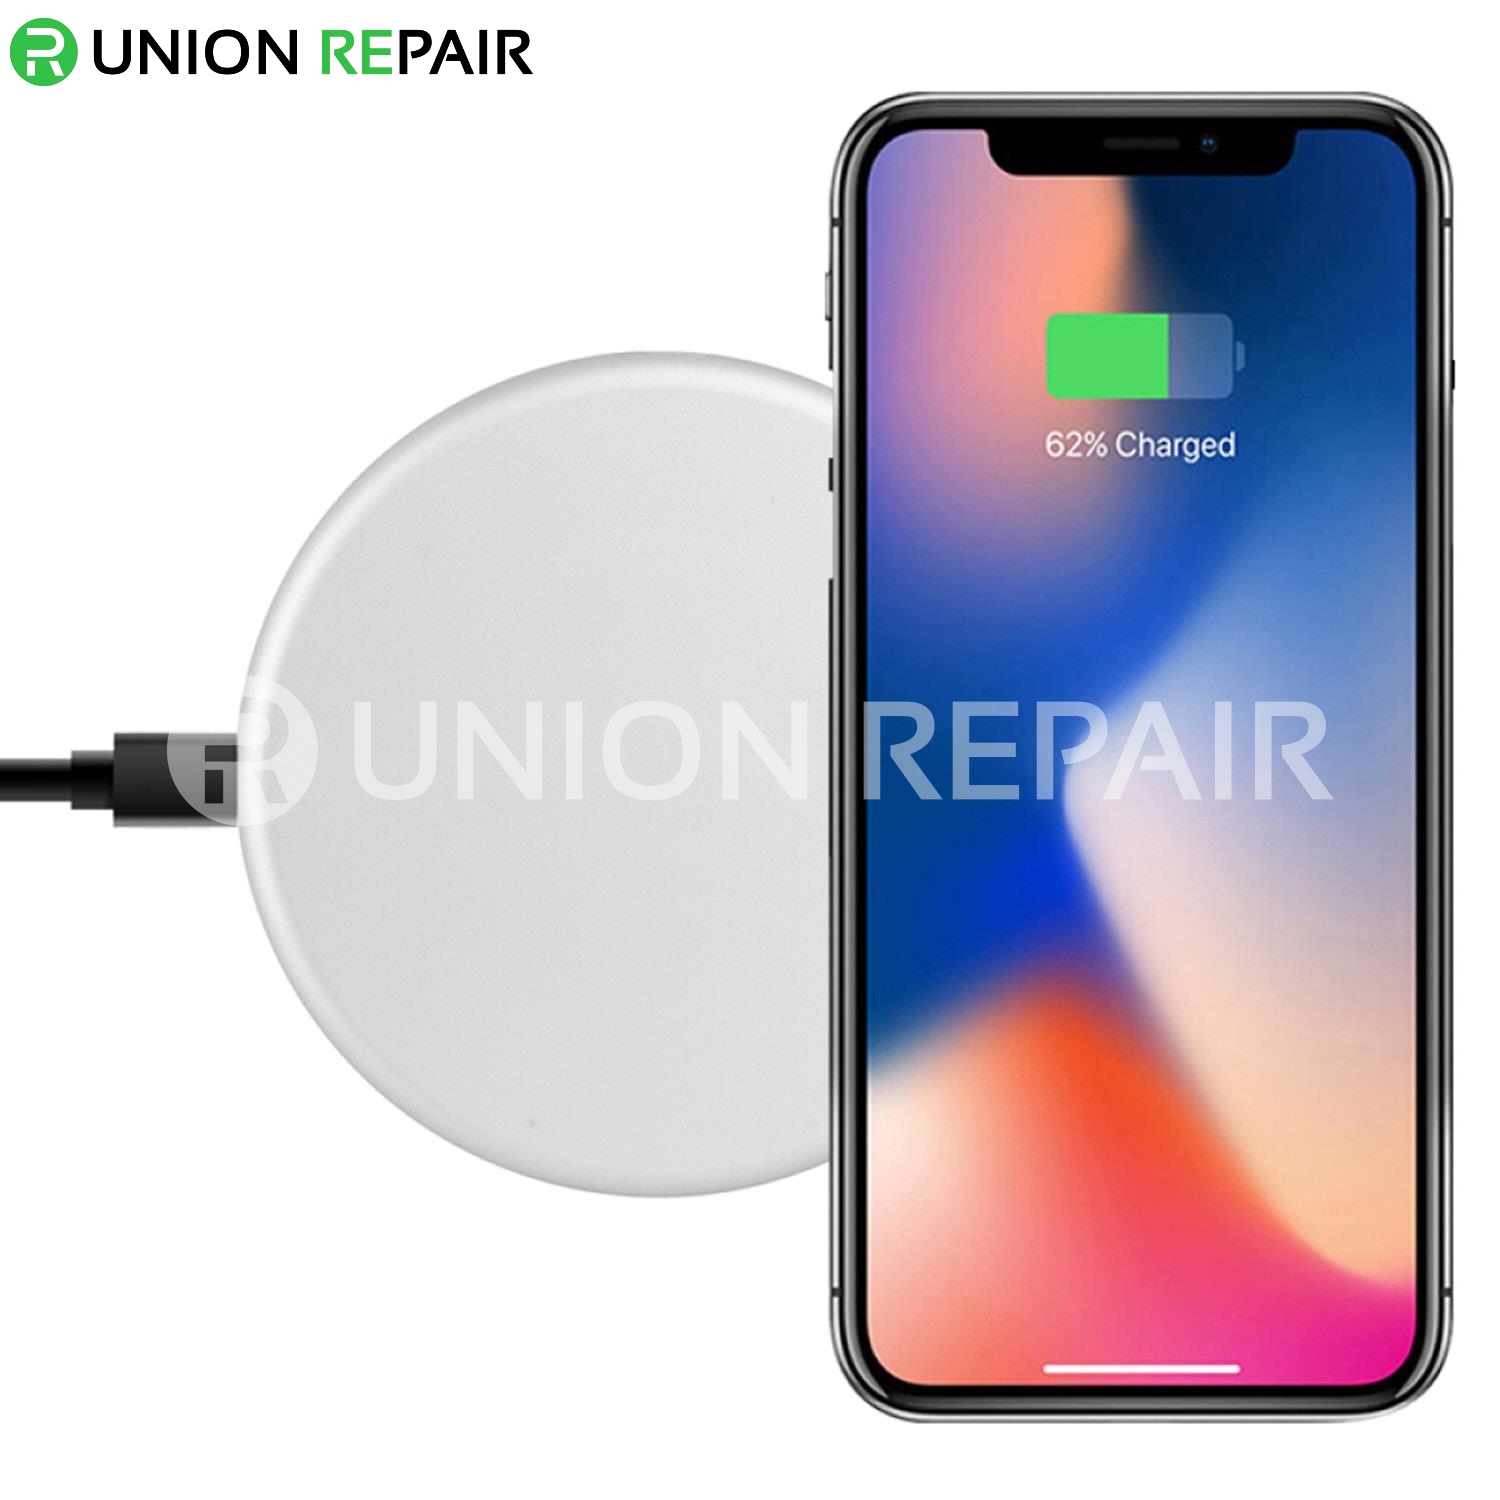 Wireless Charger Pad for Phone